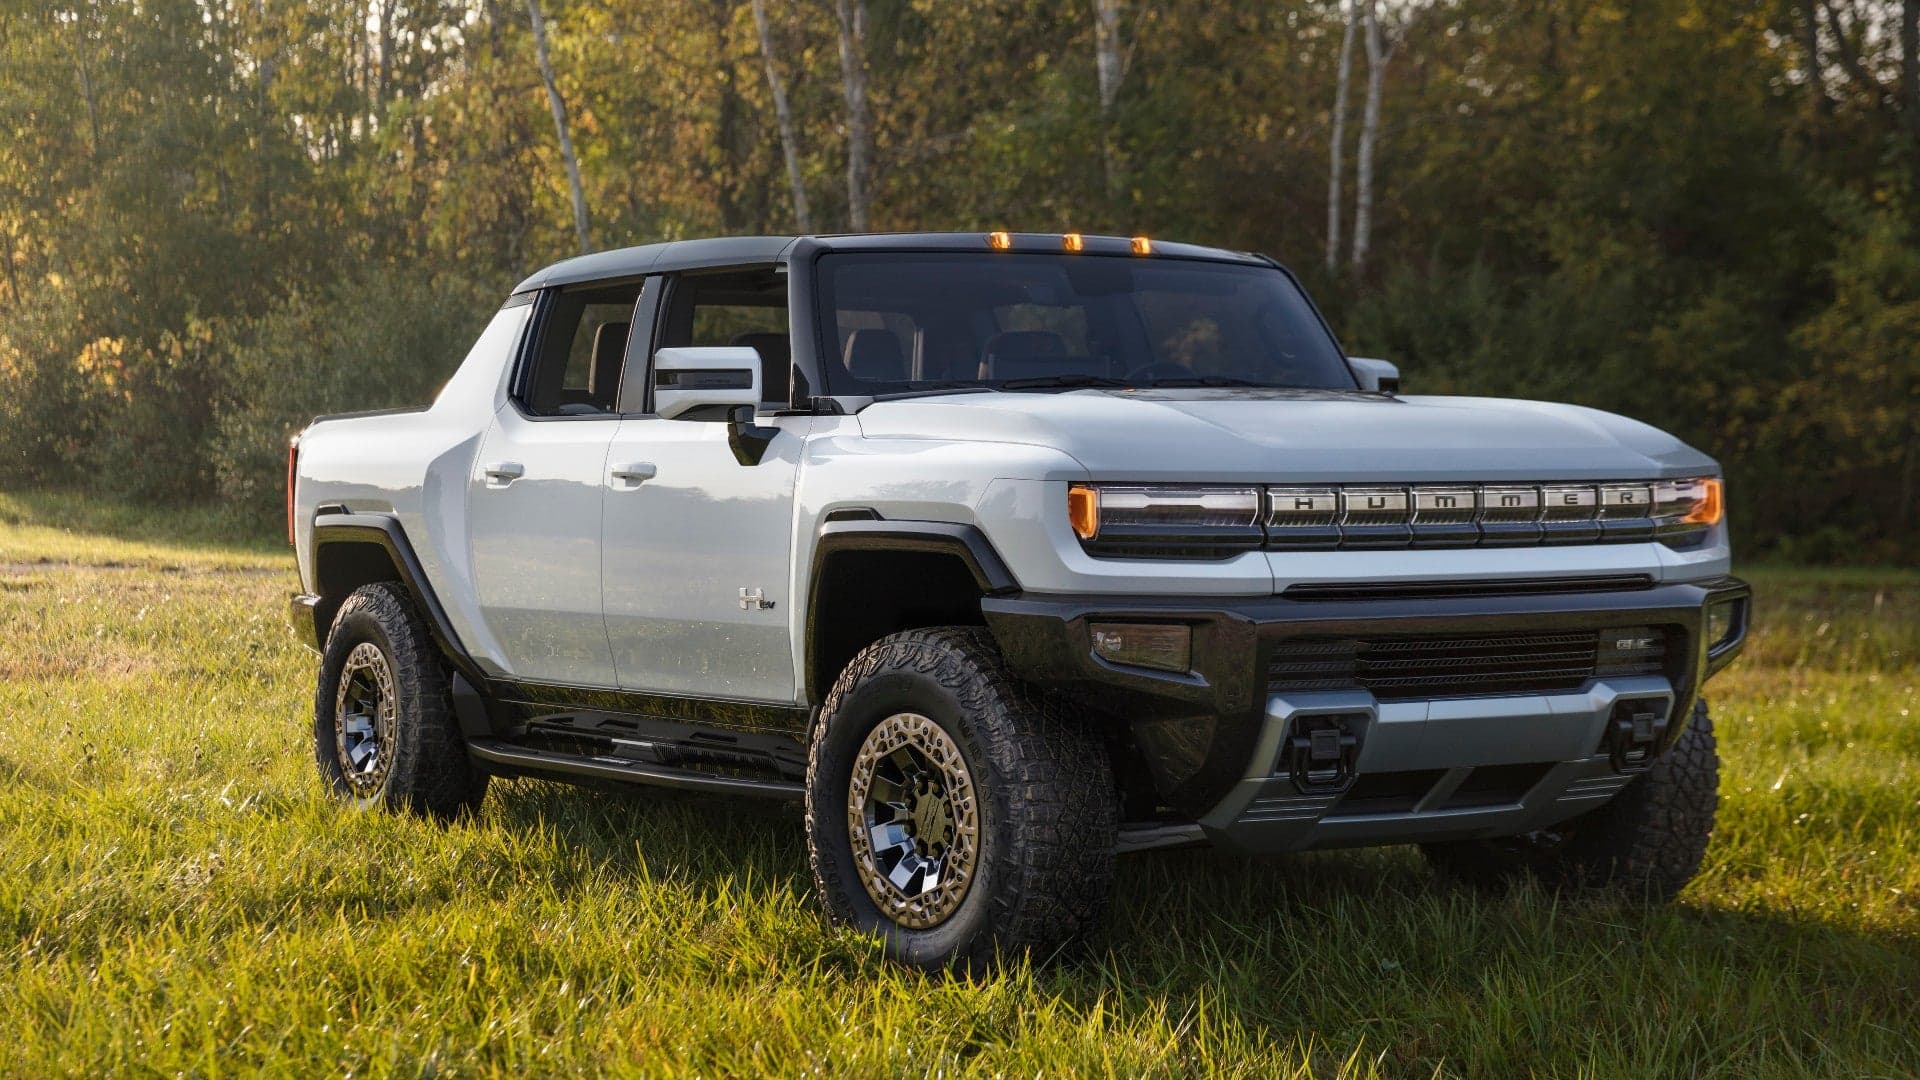 2022 GMC Hummer EV: Hummer Is Back With 1,000 Electric Horsepower and a $112,595 Price Tag